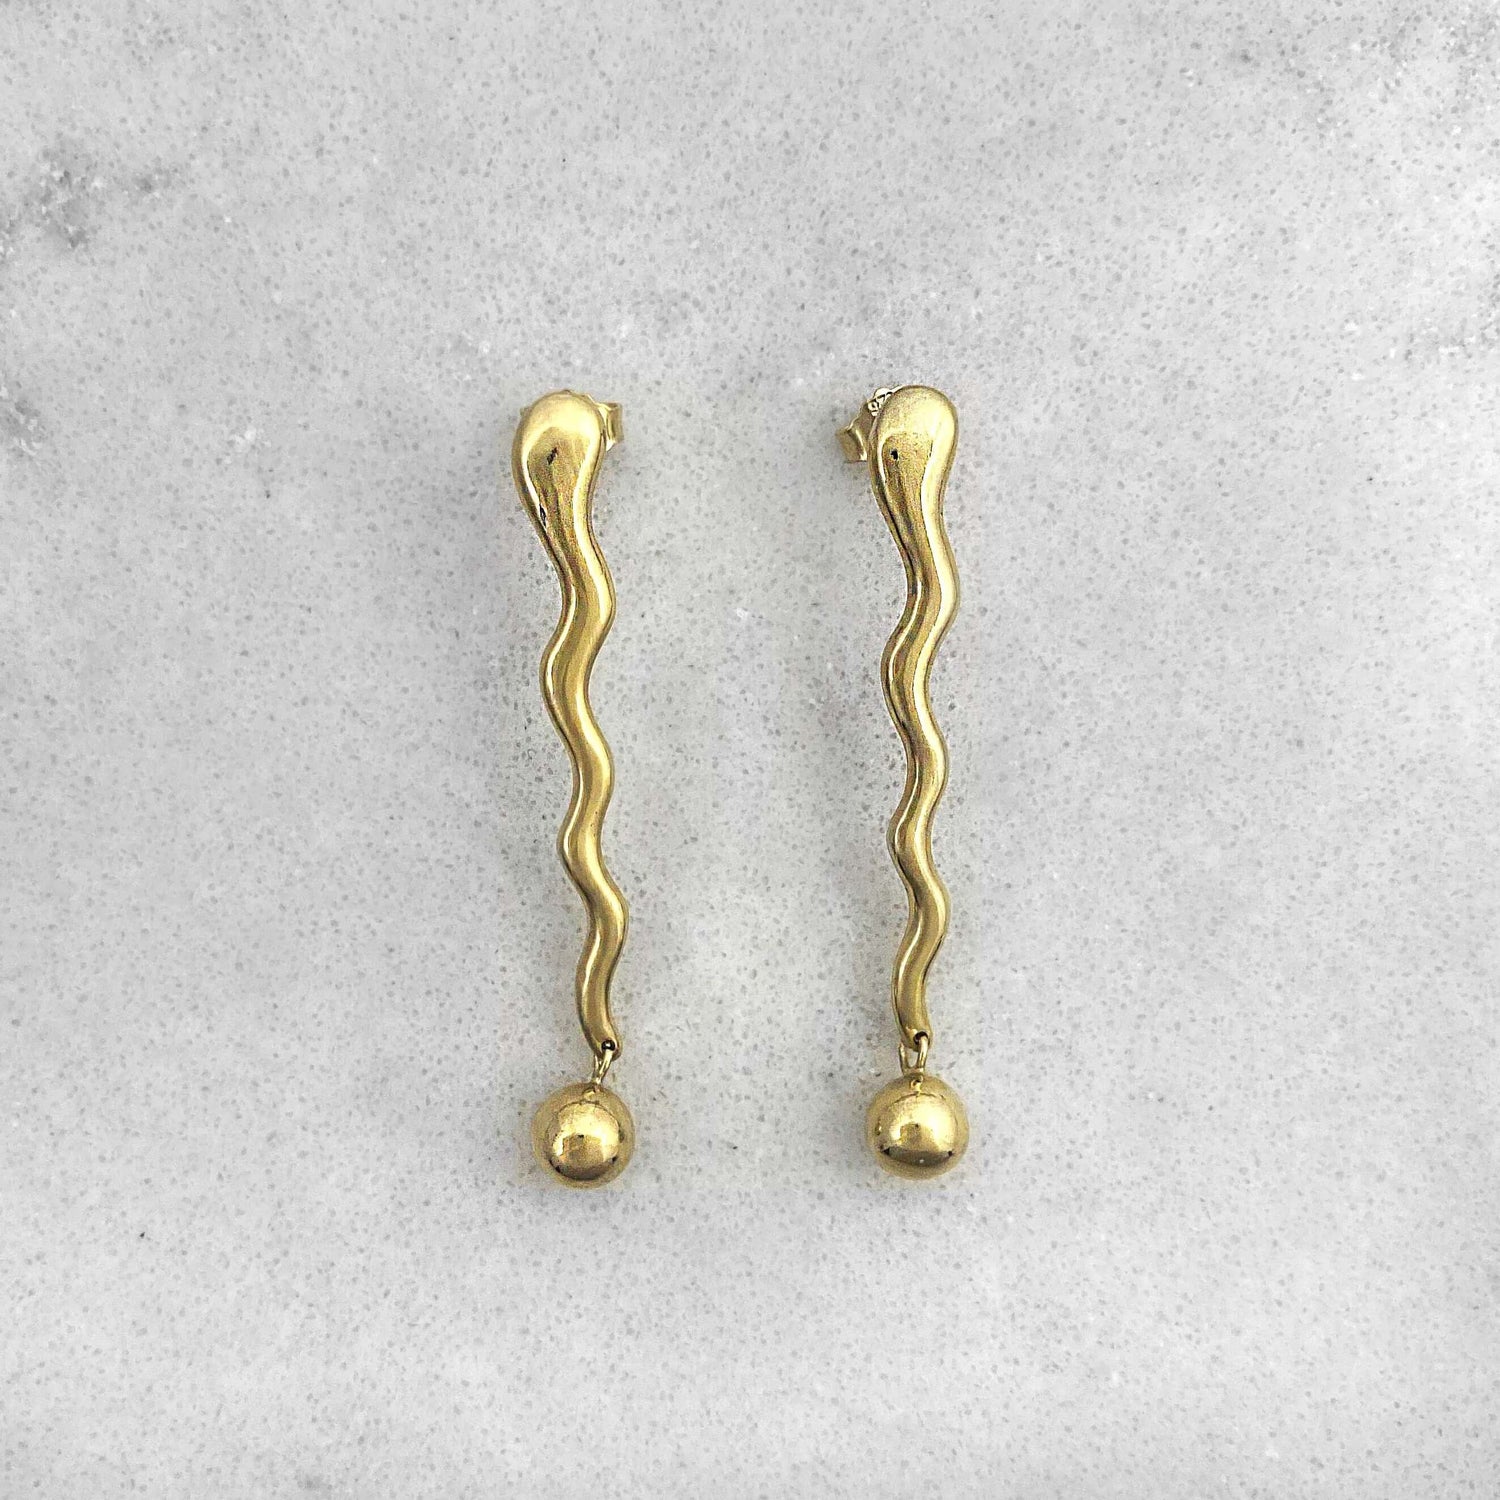 Product photo of a pair of gold earrings on a marble plate